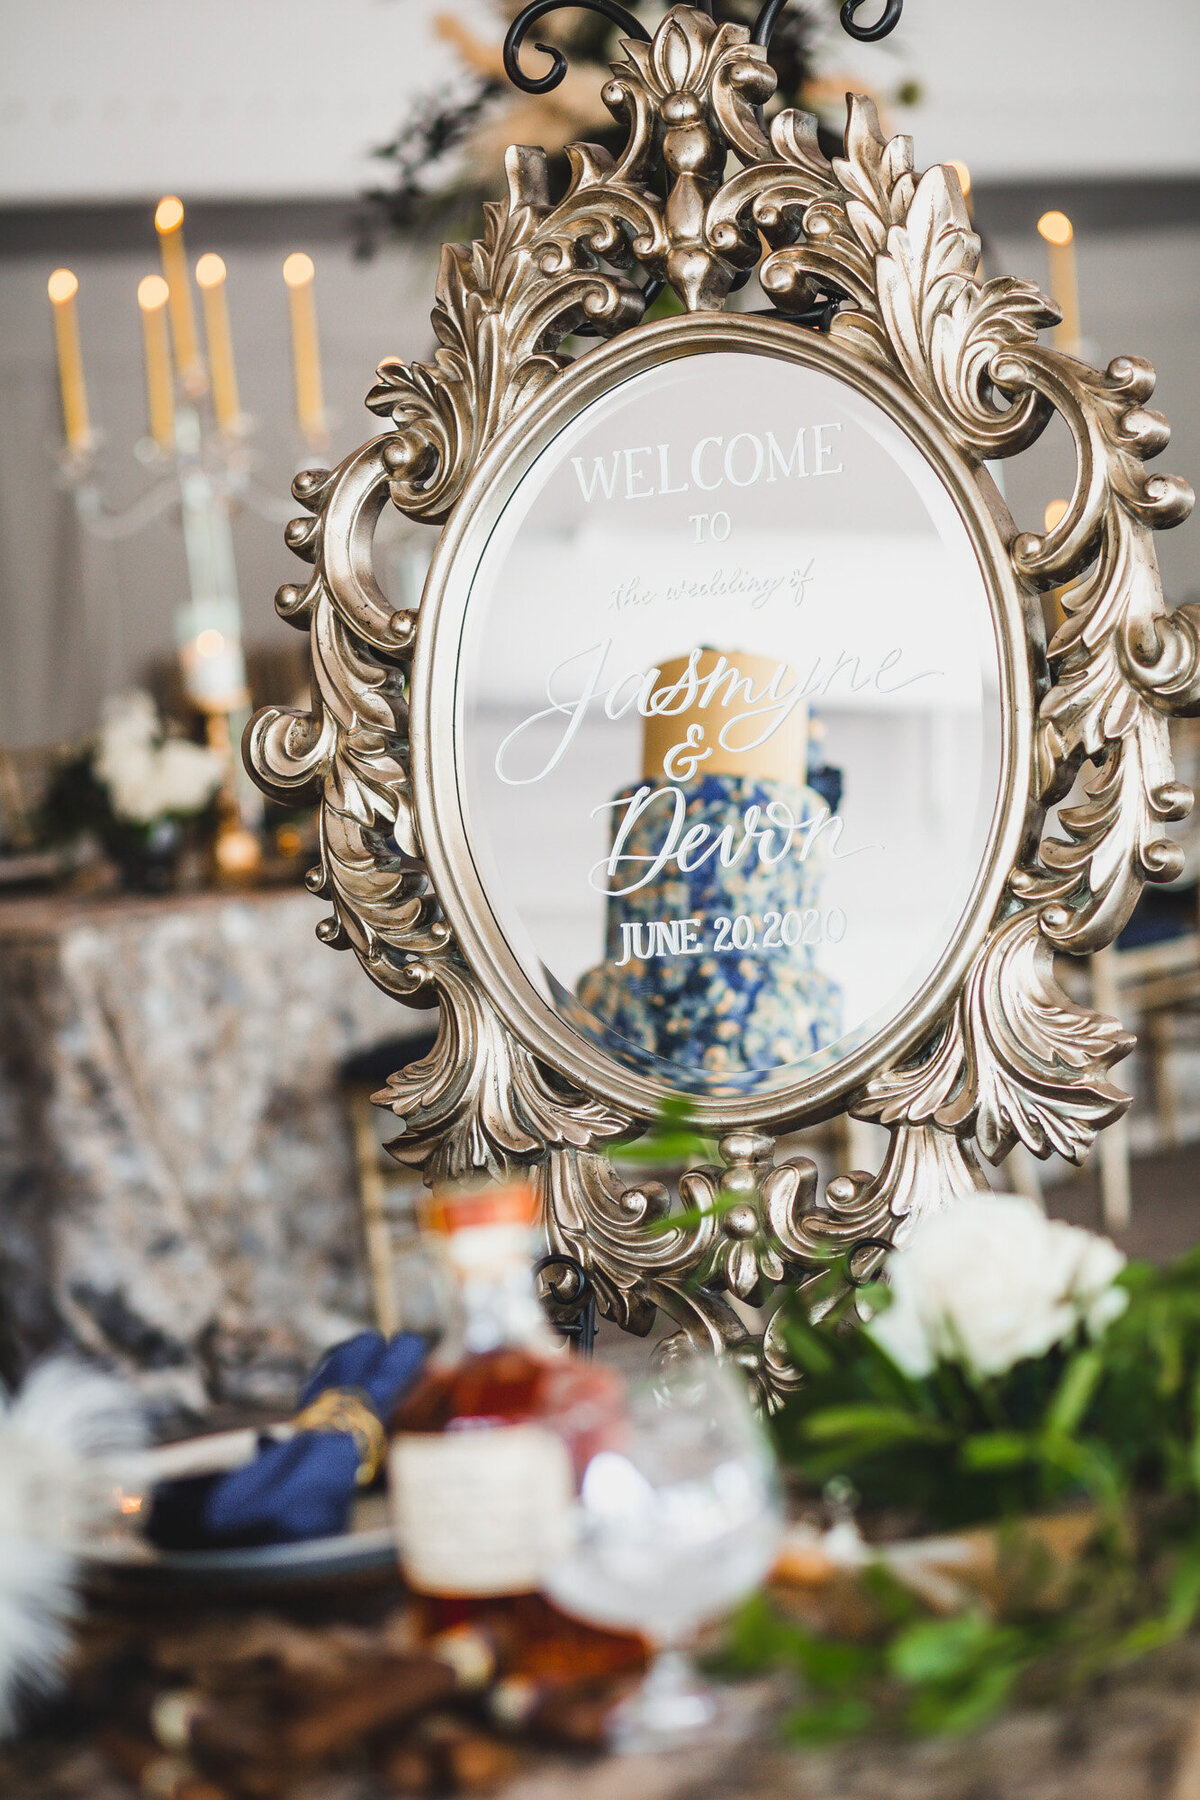 Wedding reception table and small round mirror with wedding details